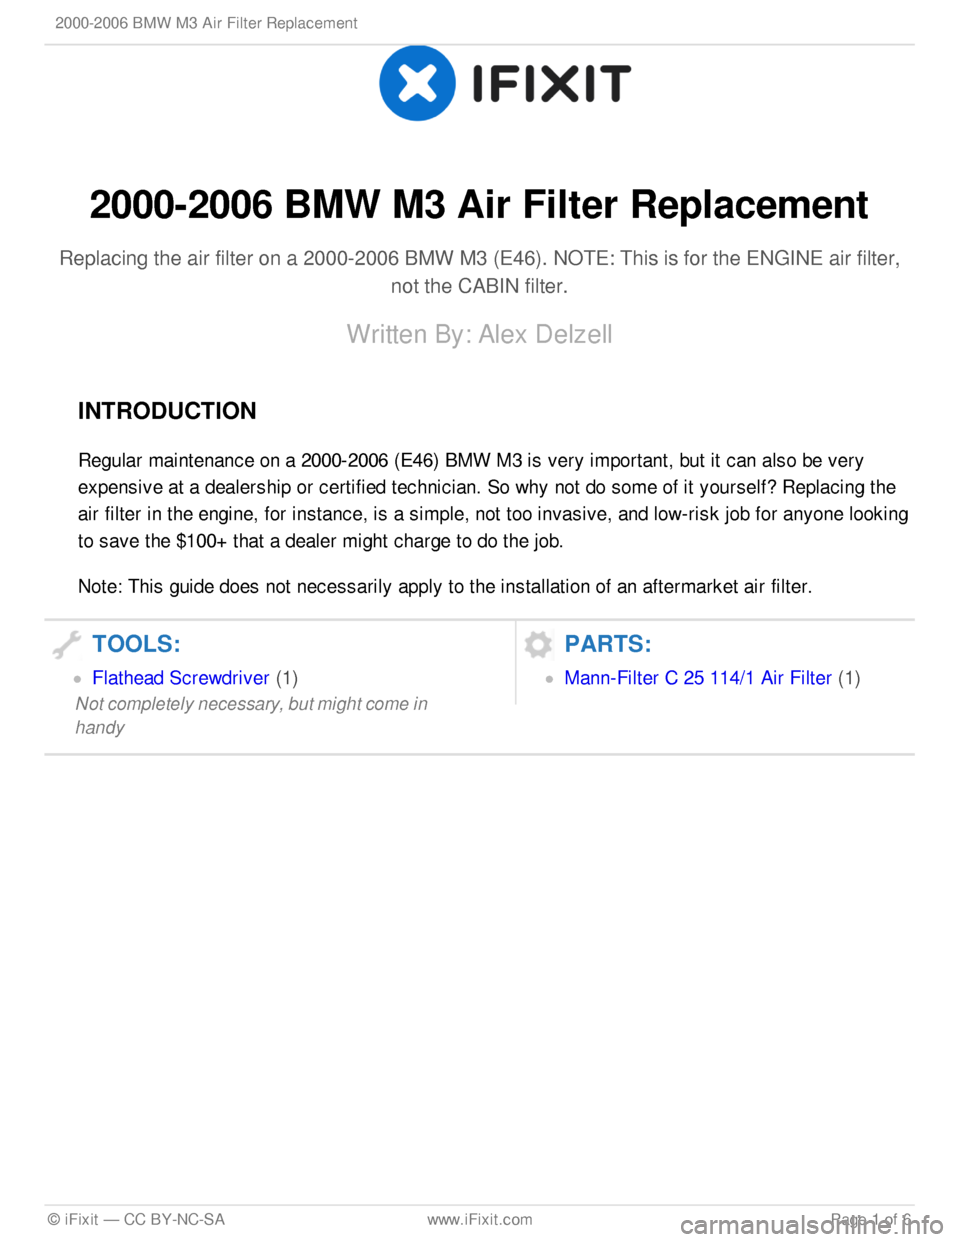 BMW M3 COUPE 2003 E46 Air Filter Replacement 2000-2 006 B M W  M 3 A ir  F ilt e r R ep la cem en t
Repla cin g th e a ir  filt e r o n a  2 000-2 006 B M W  M 3 ( E 46). N O TE : T his  is  fo r th e E N G IN E a ir  filt e r,
not th e C ABIN  